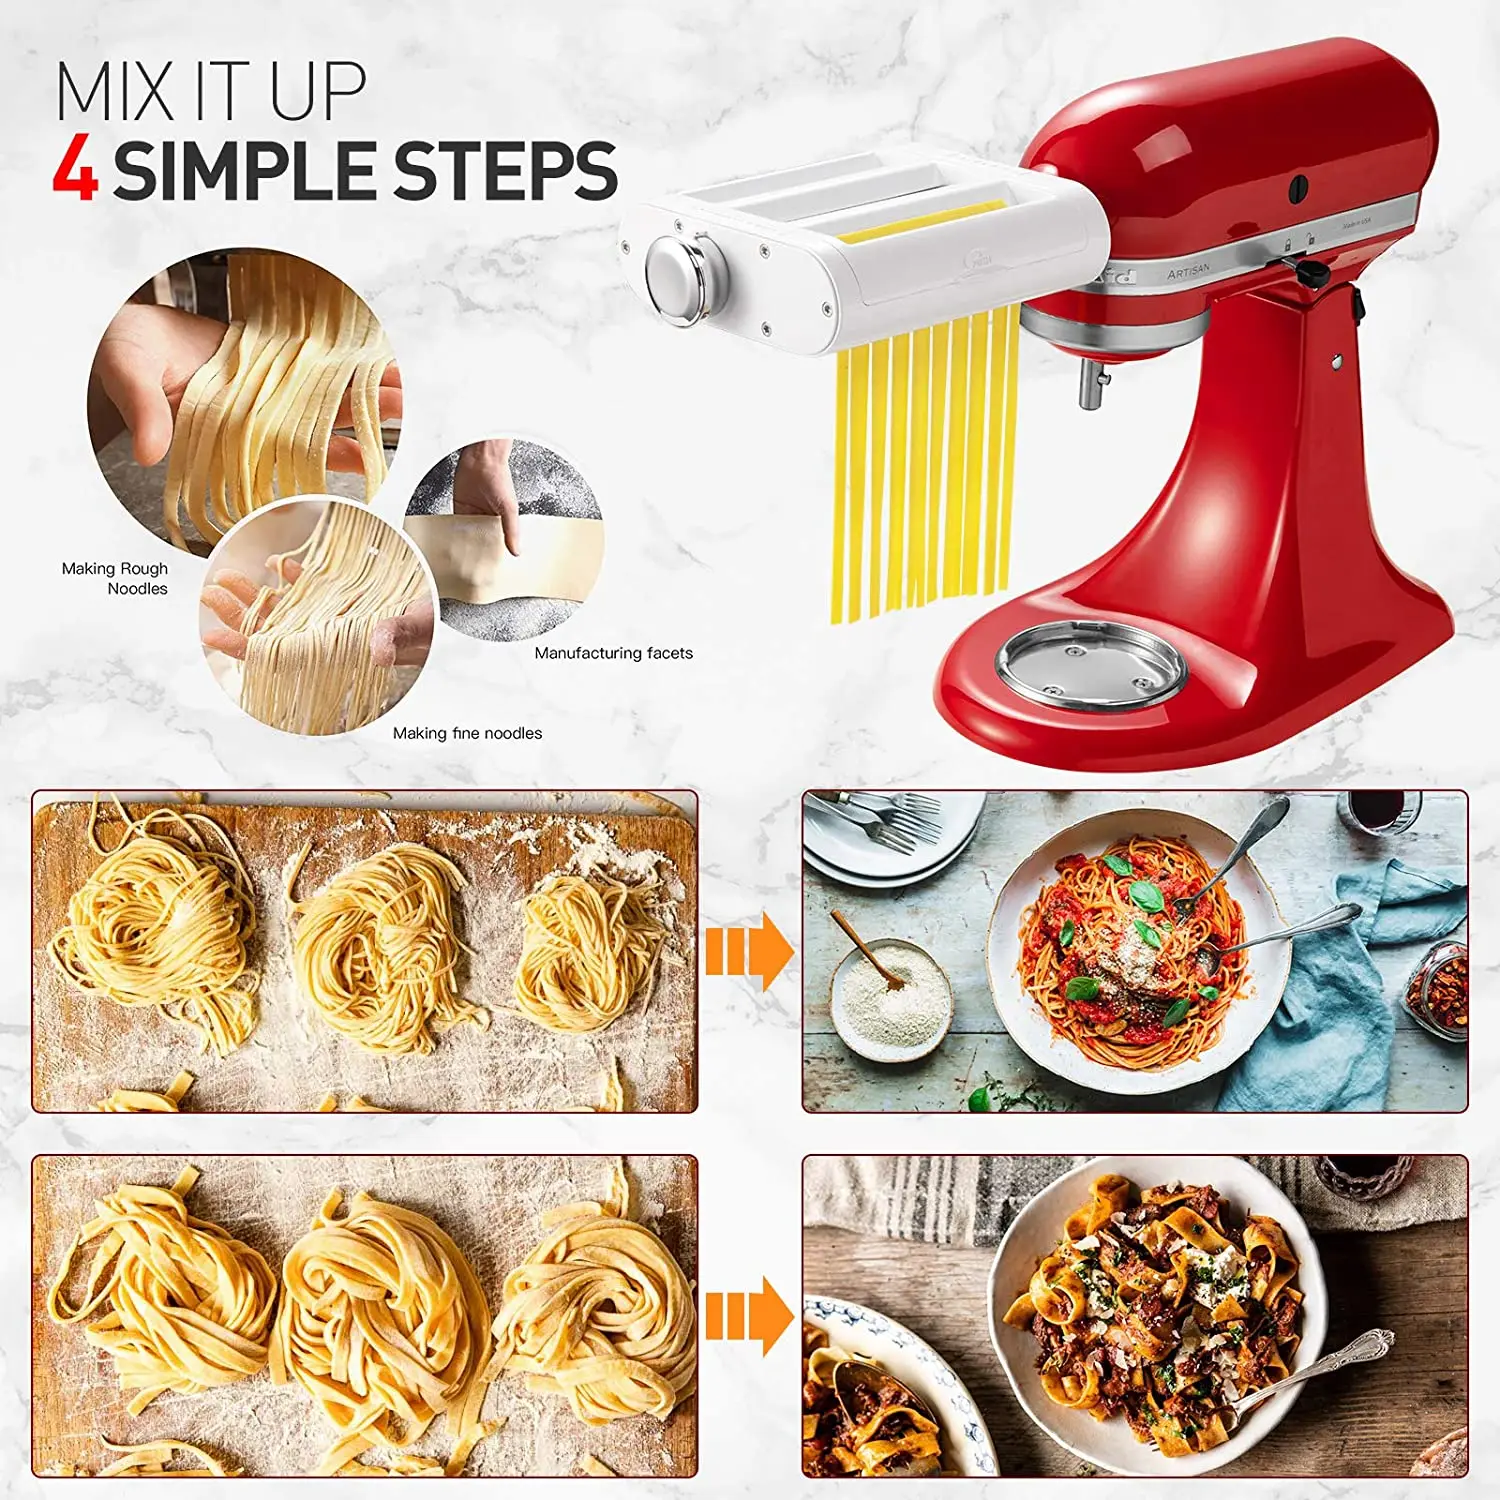 https://ae01.alicdn.com/kf/H29403db7068f47c58ba630d94998b96ck/Pasta-Maker-Attachment-3-in-1-Set-for-KitchenAid-Stand-Mixers-Included-Pasta-Sheet-Roller-Spaghetti.jpg